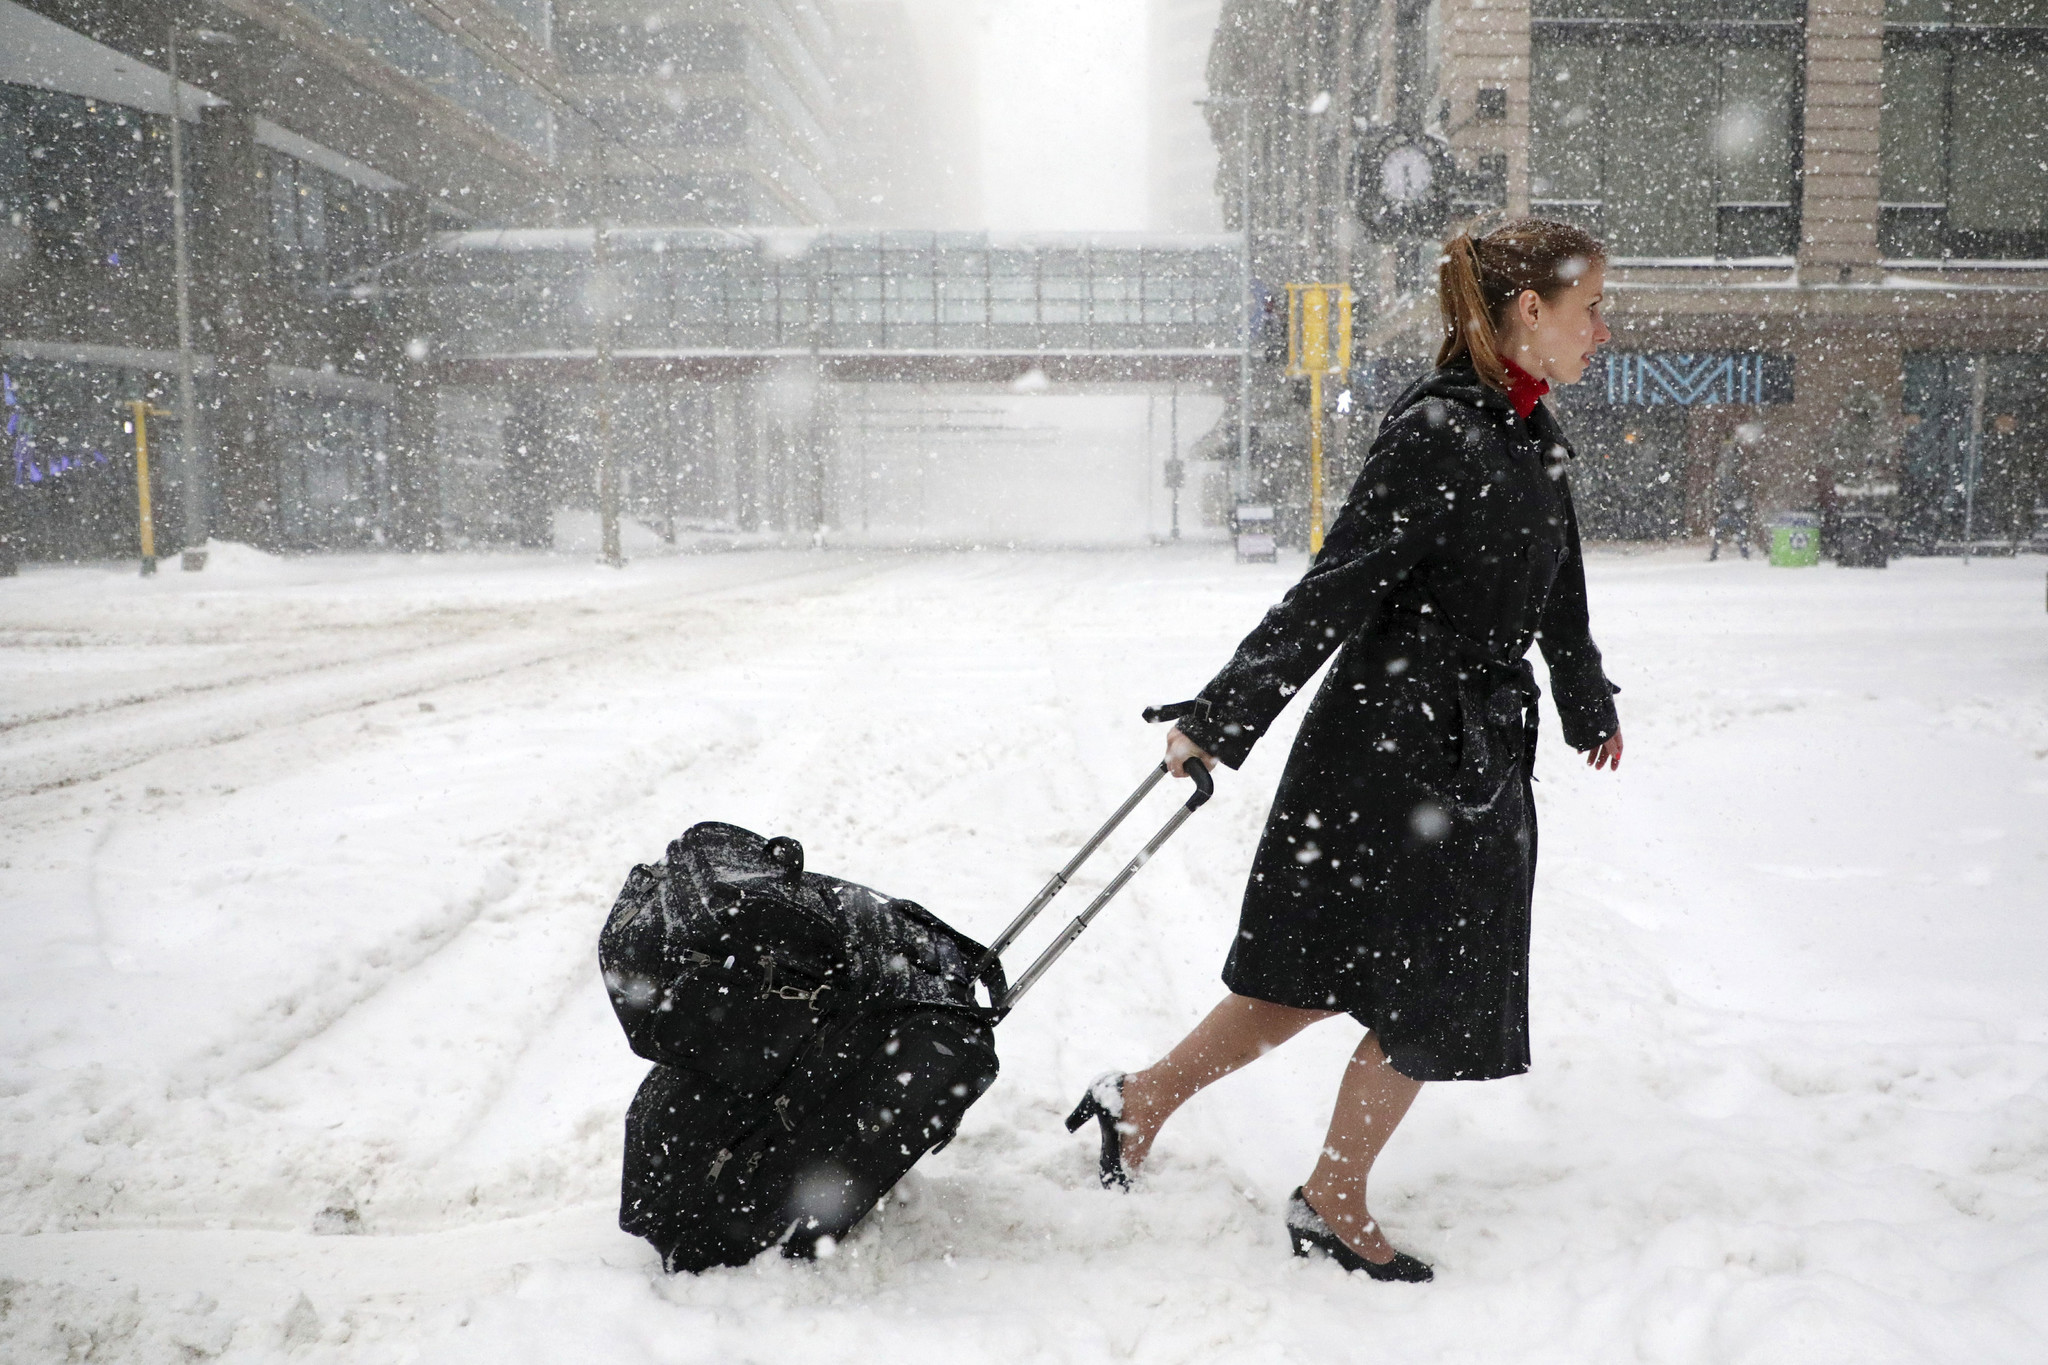 Spring storm moves east after blanketing central U.S. in snow ...